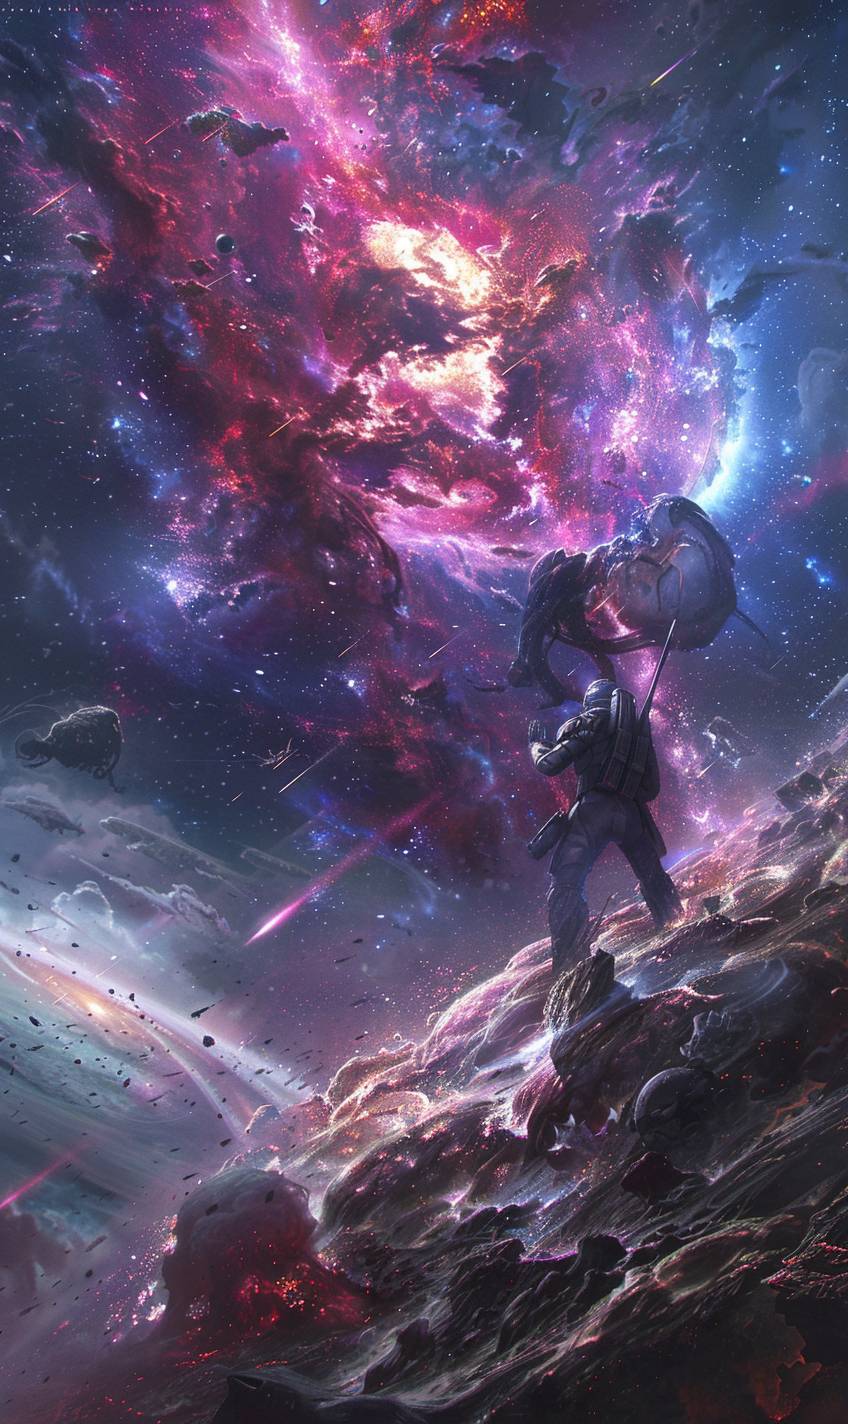 In the style of Emmanuel Shiu, cosmic battle among the stars